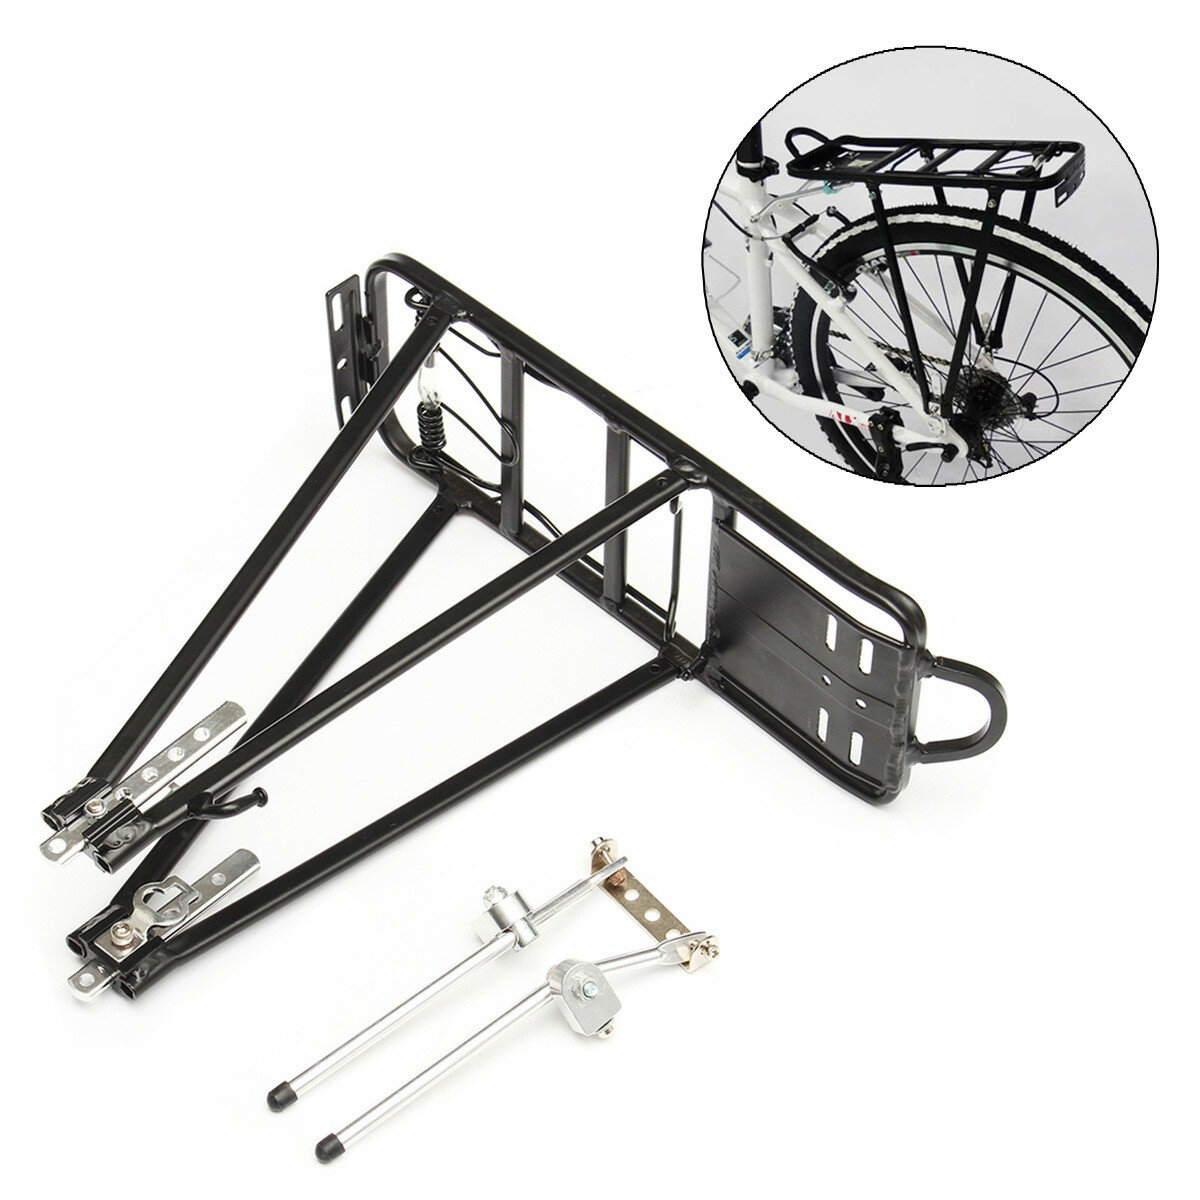 

25KG Max Load Aluminum Alloy Rear Rack Carrier Bike Pannier Luggage Rack For Cycling MTB Mountain Bicycle